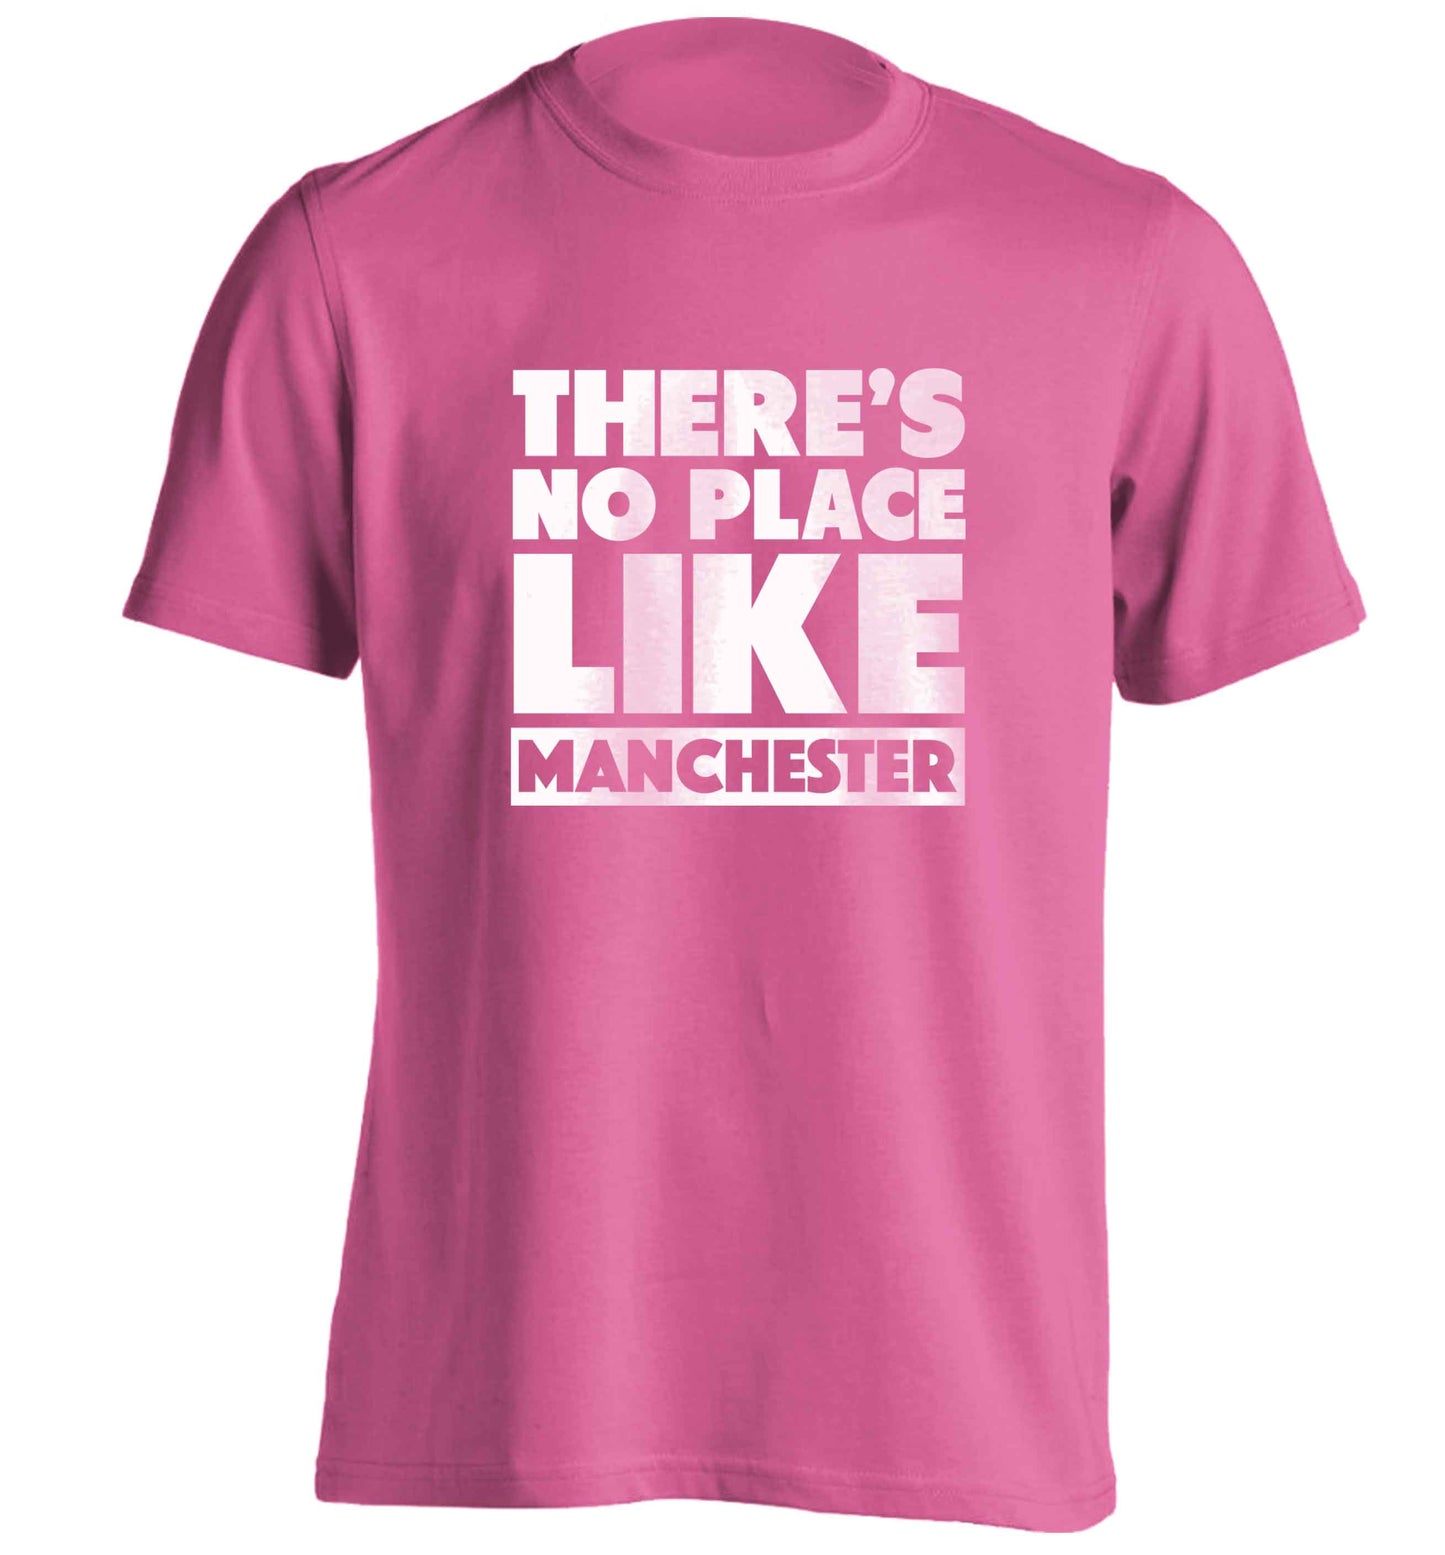 There's no place like Manchester adults unisex pink Tshirt 2XL